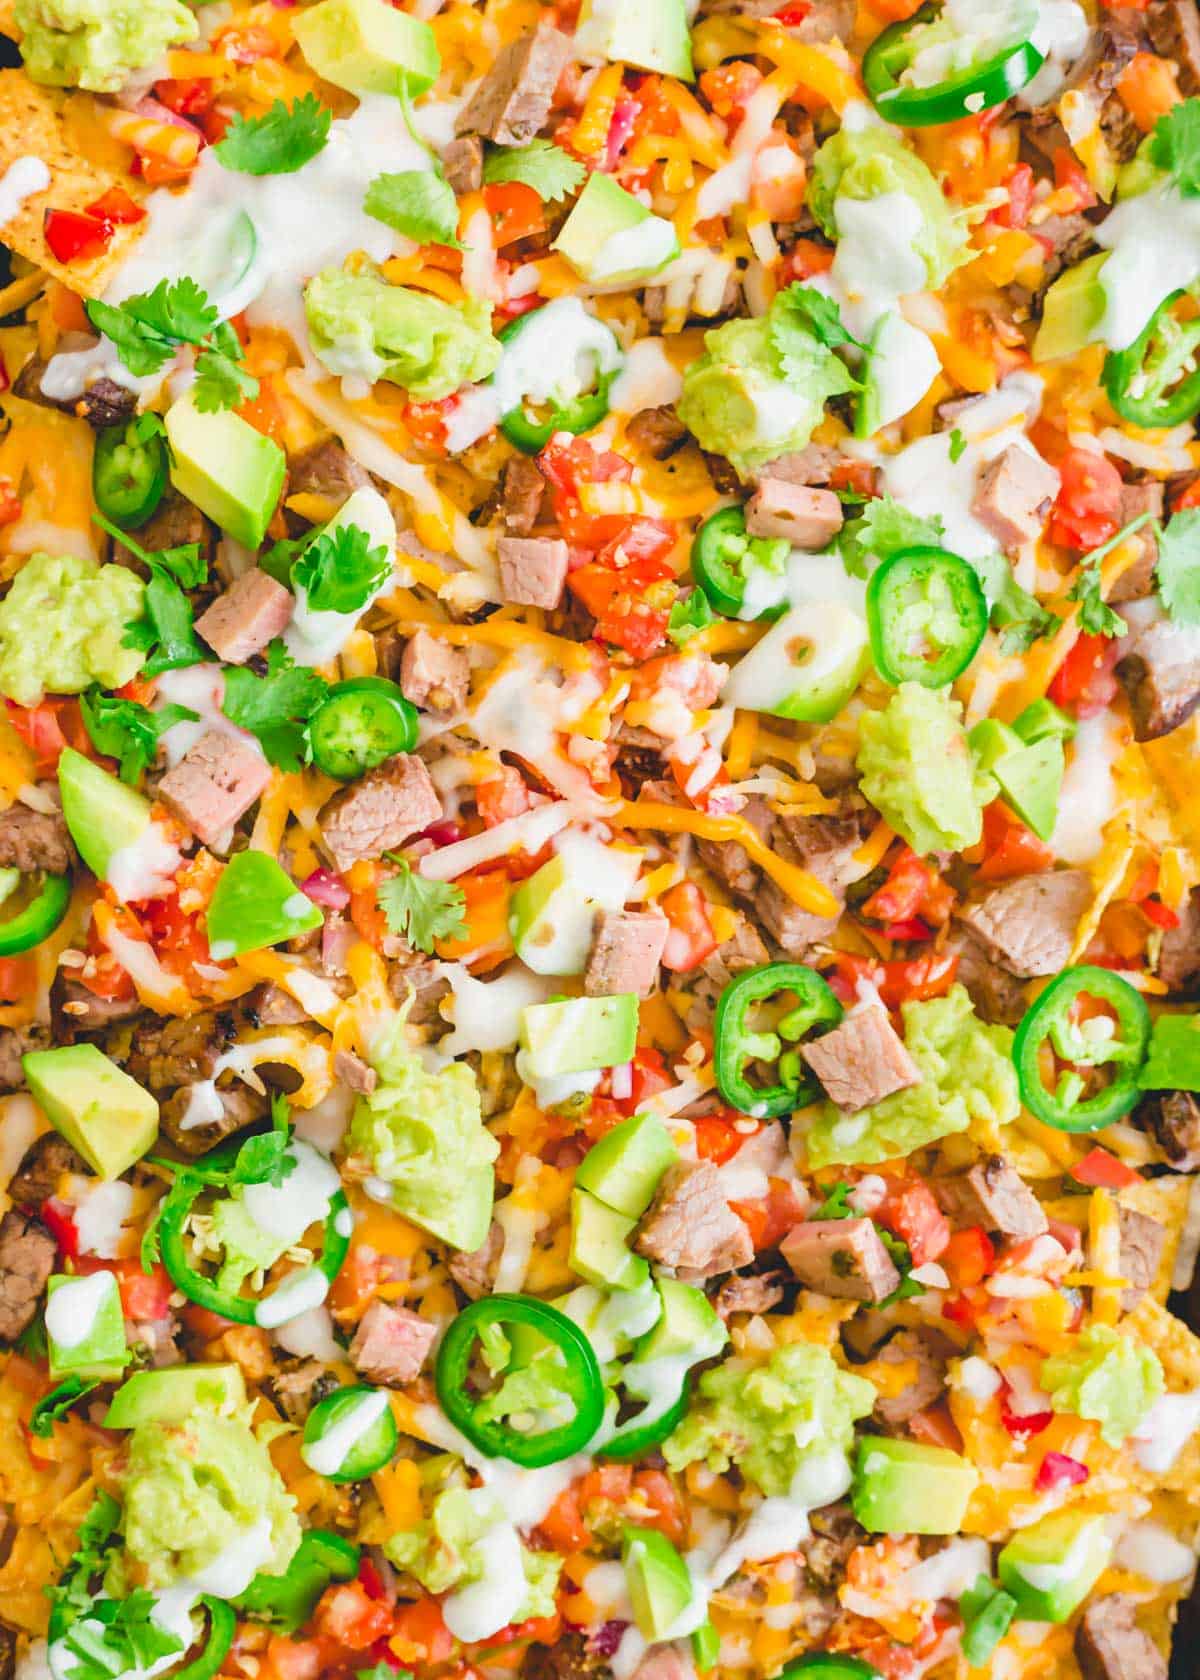 Loaded carne asada steak nachos are the perfect game day food.